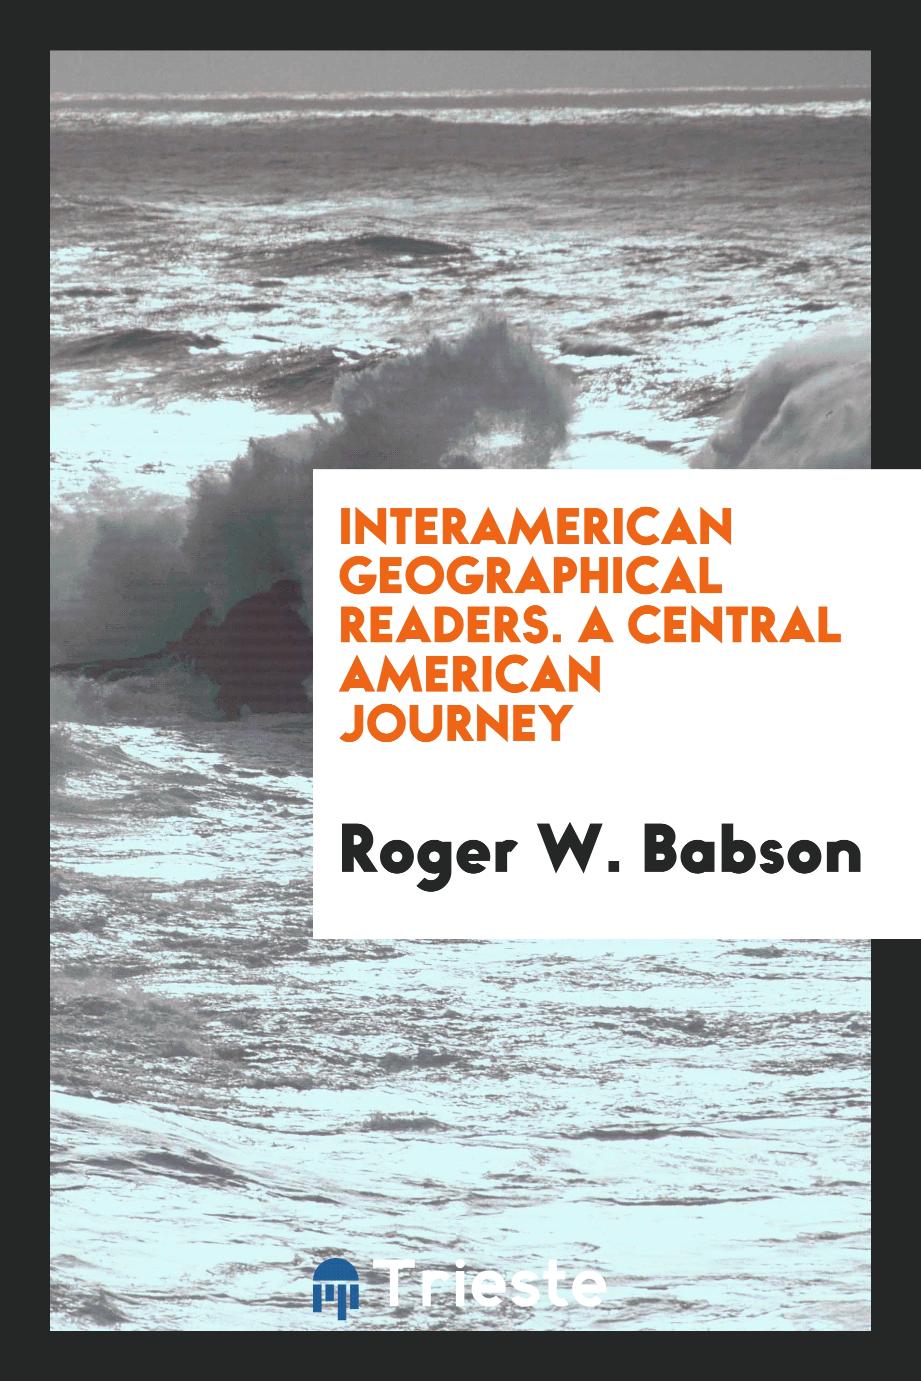 Interamerican Geographical Readers. A Central American Journey